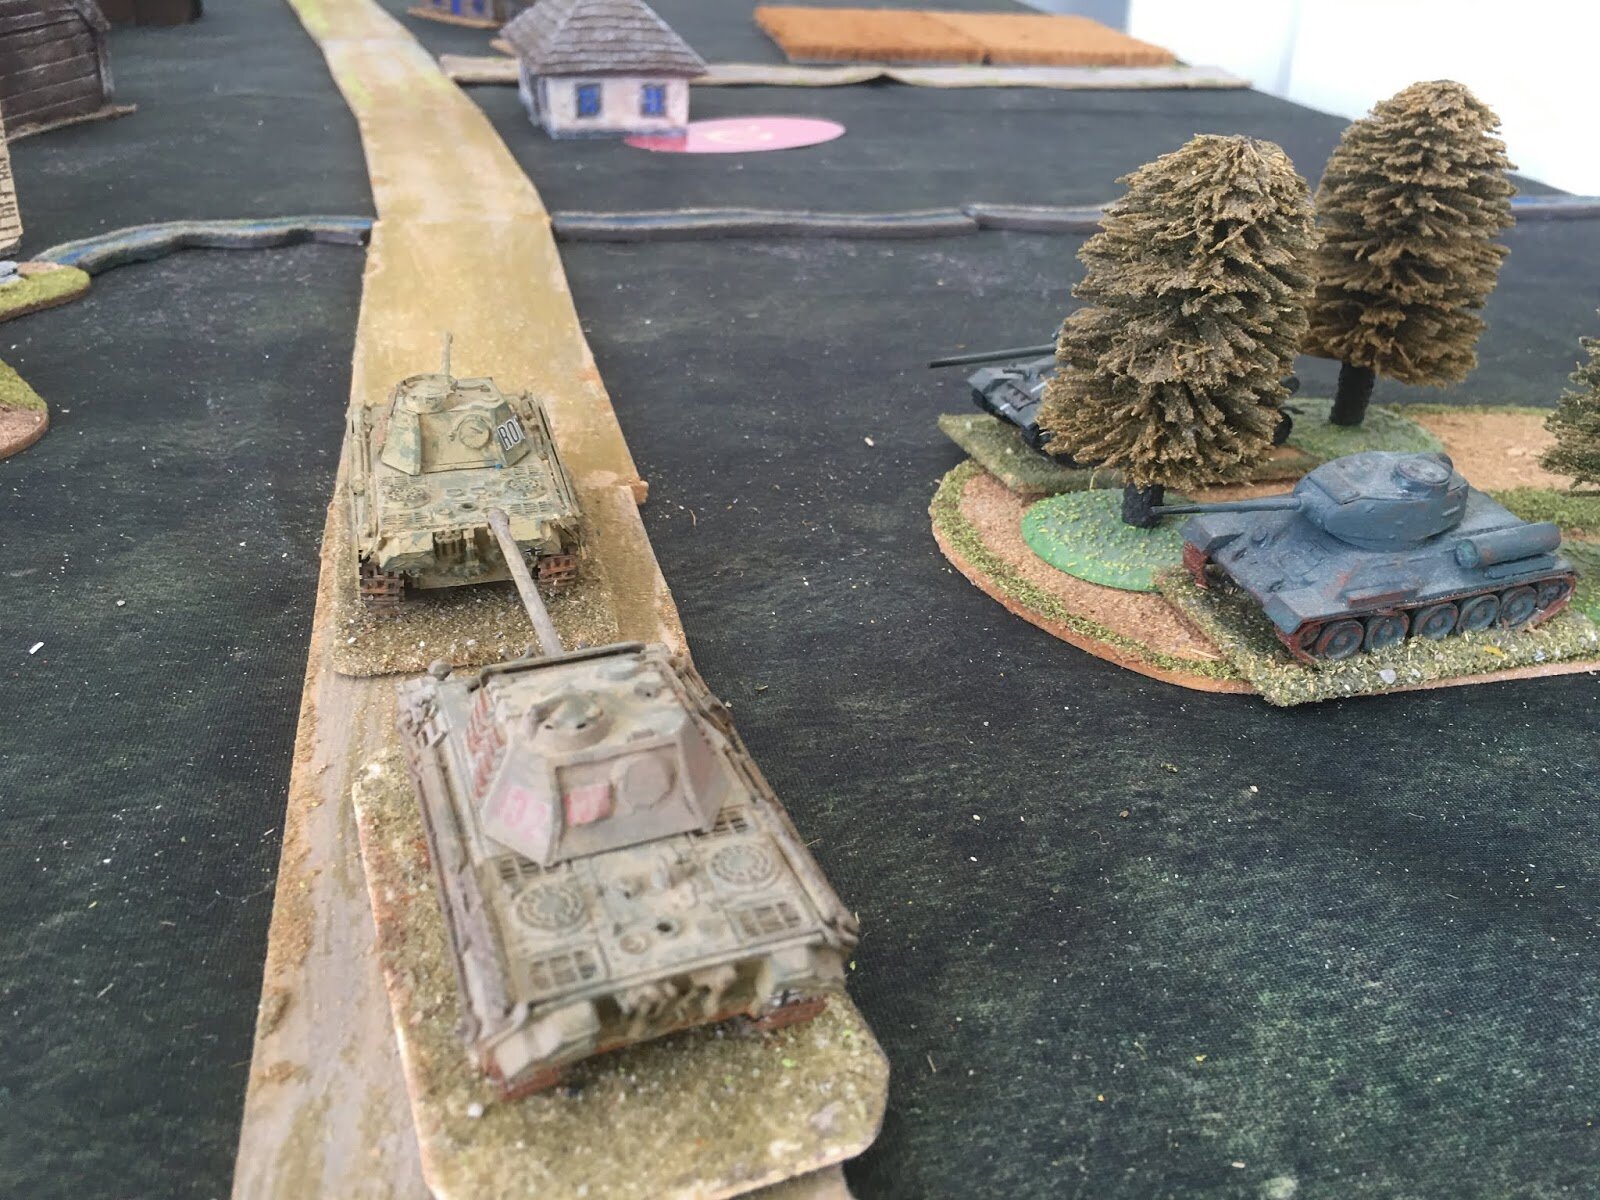 The German commander recklessly sends his best unit forward: two Panthers